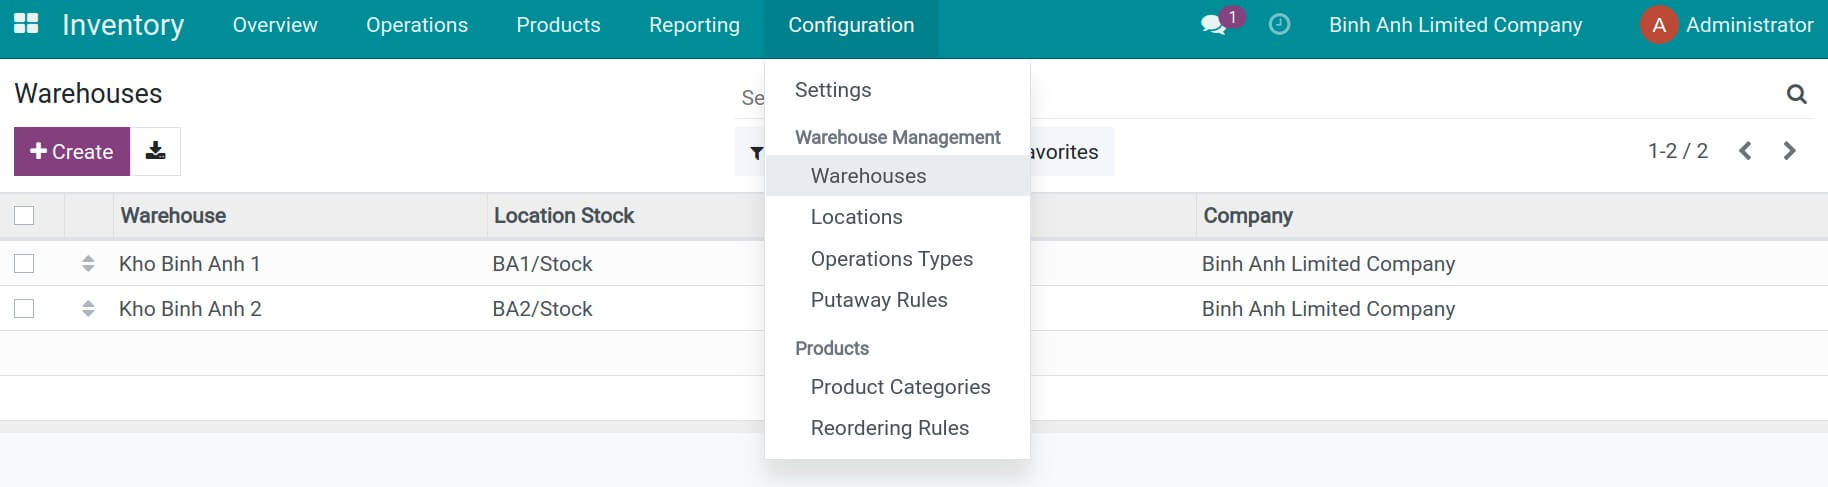 Set up multi-warehouses in Company B